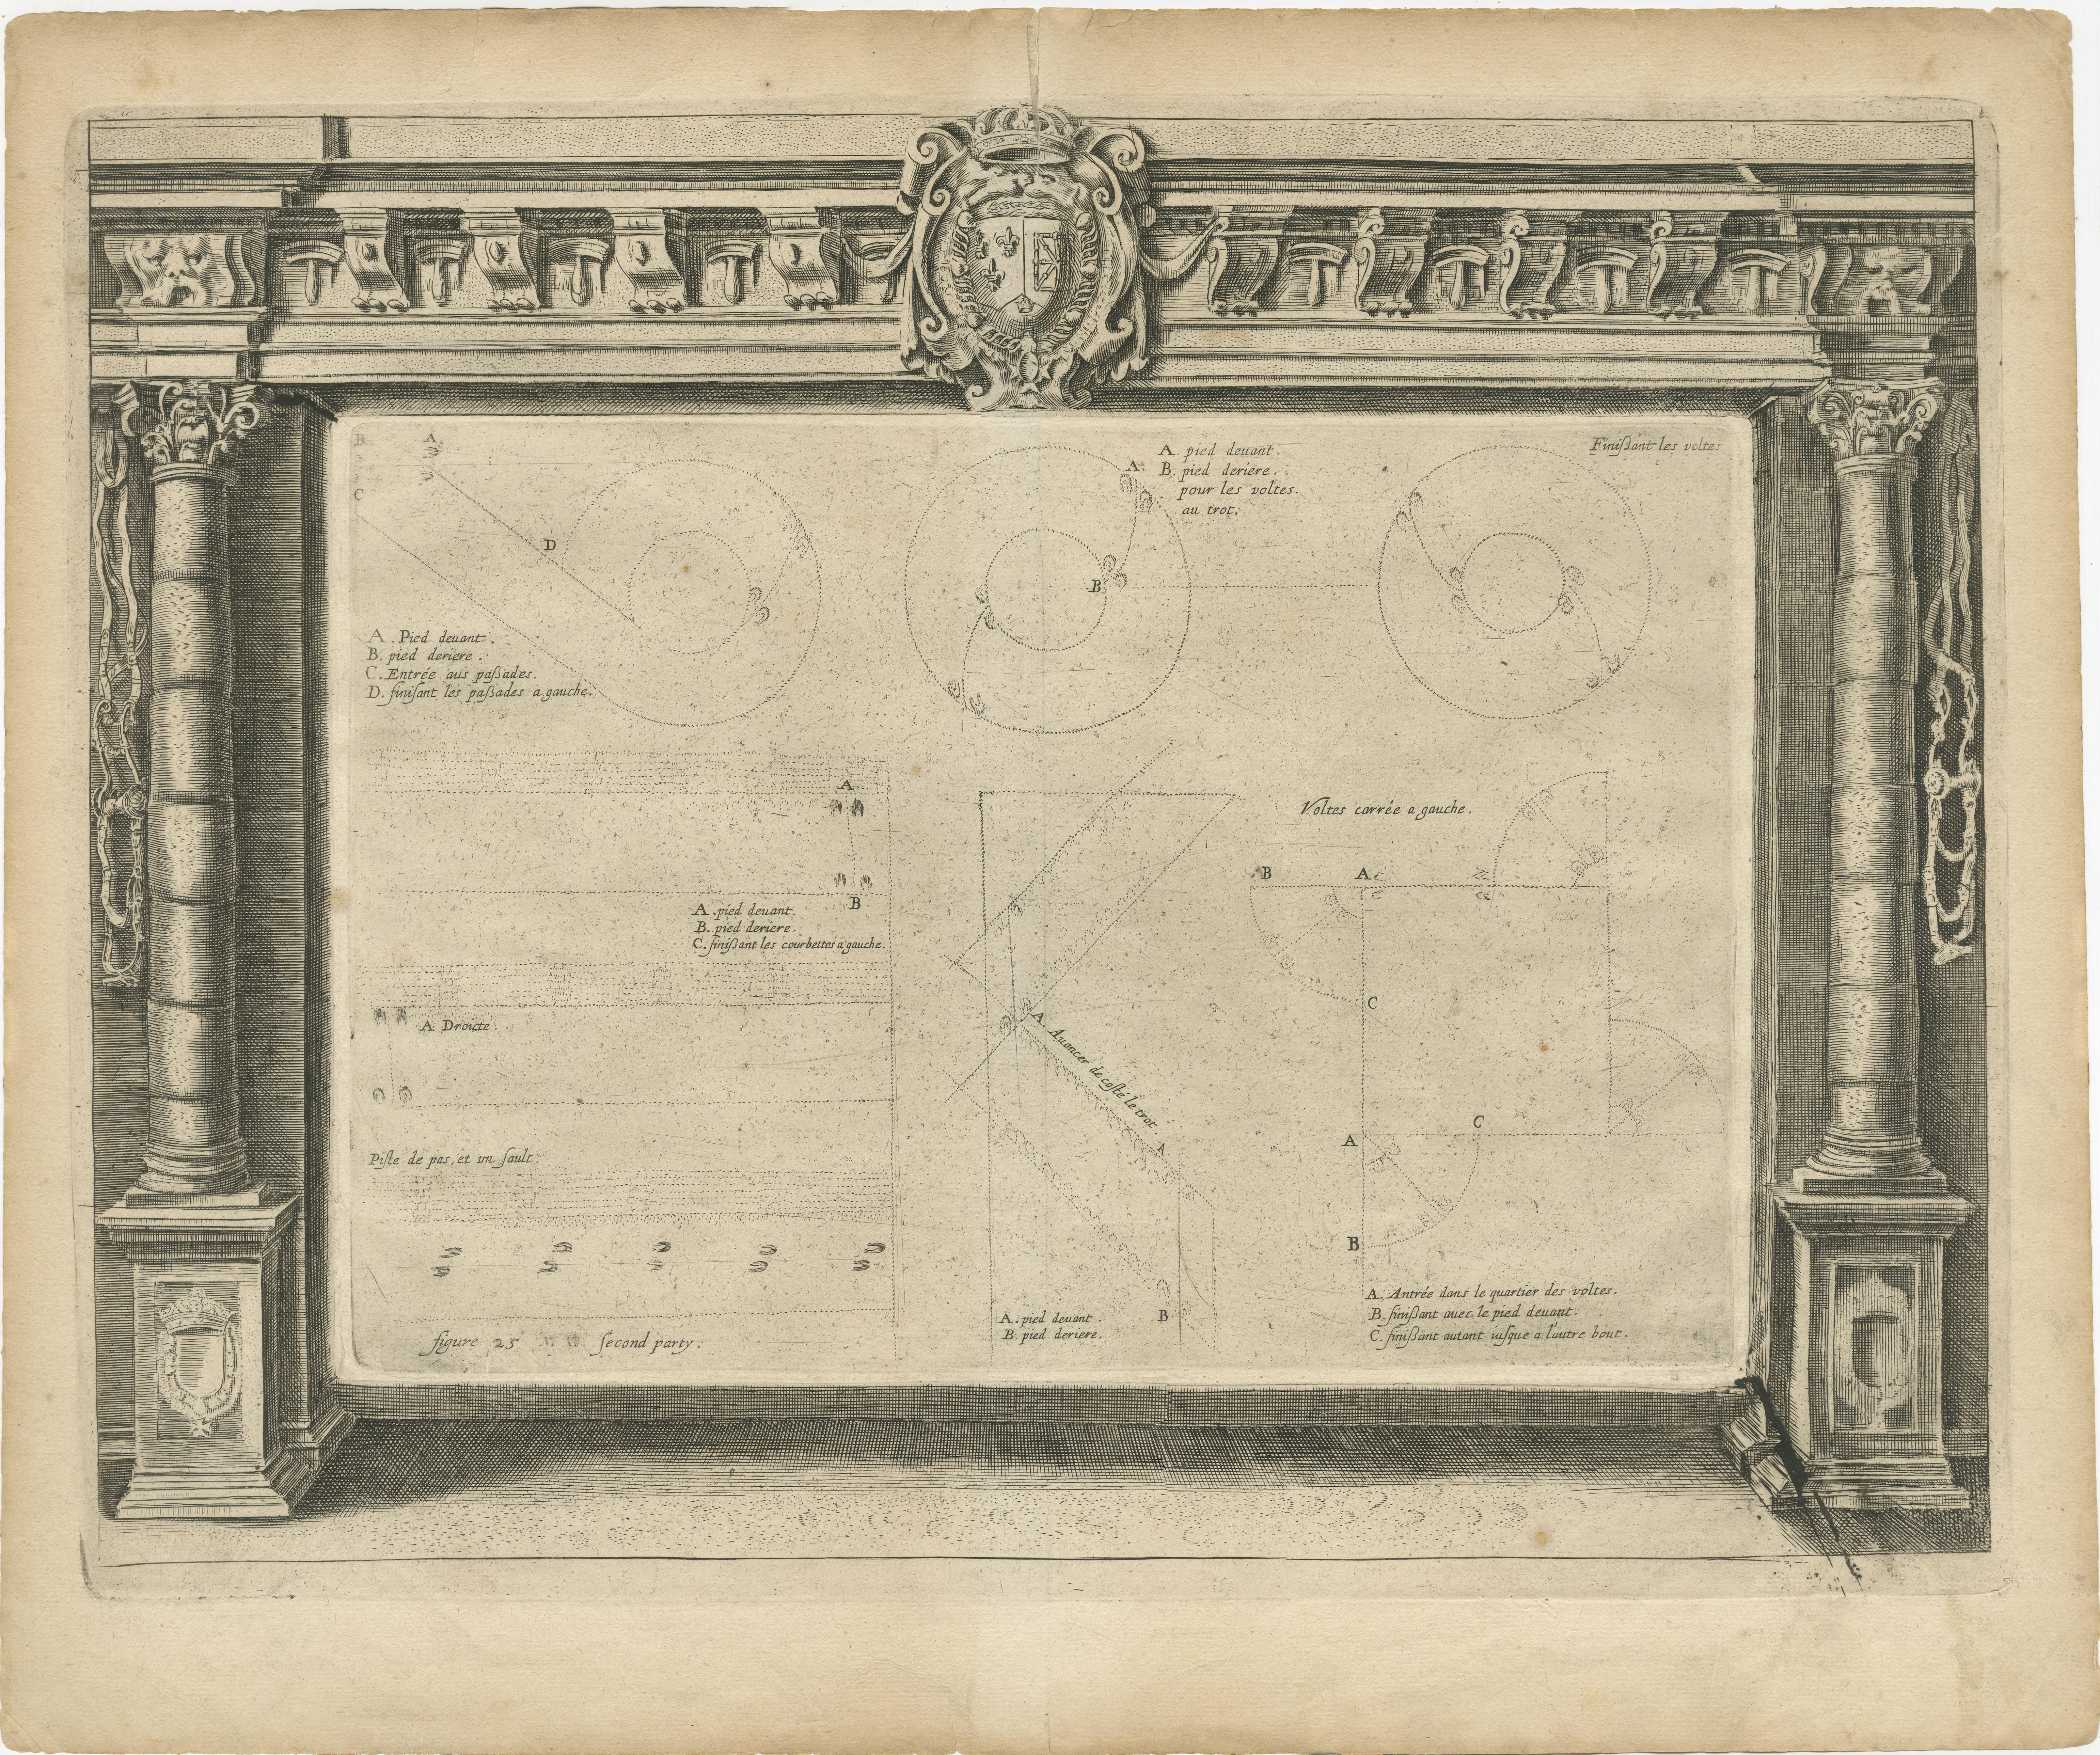 Figure 25 of second part: Schematic outlines of different volte manoeuvres; surrounded by frame on separate plate showing classical architecture and coat of arms of France and Navarre at top centre; illustration to second edition of Antoine de